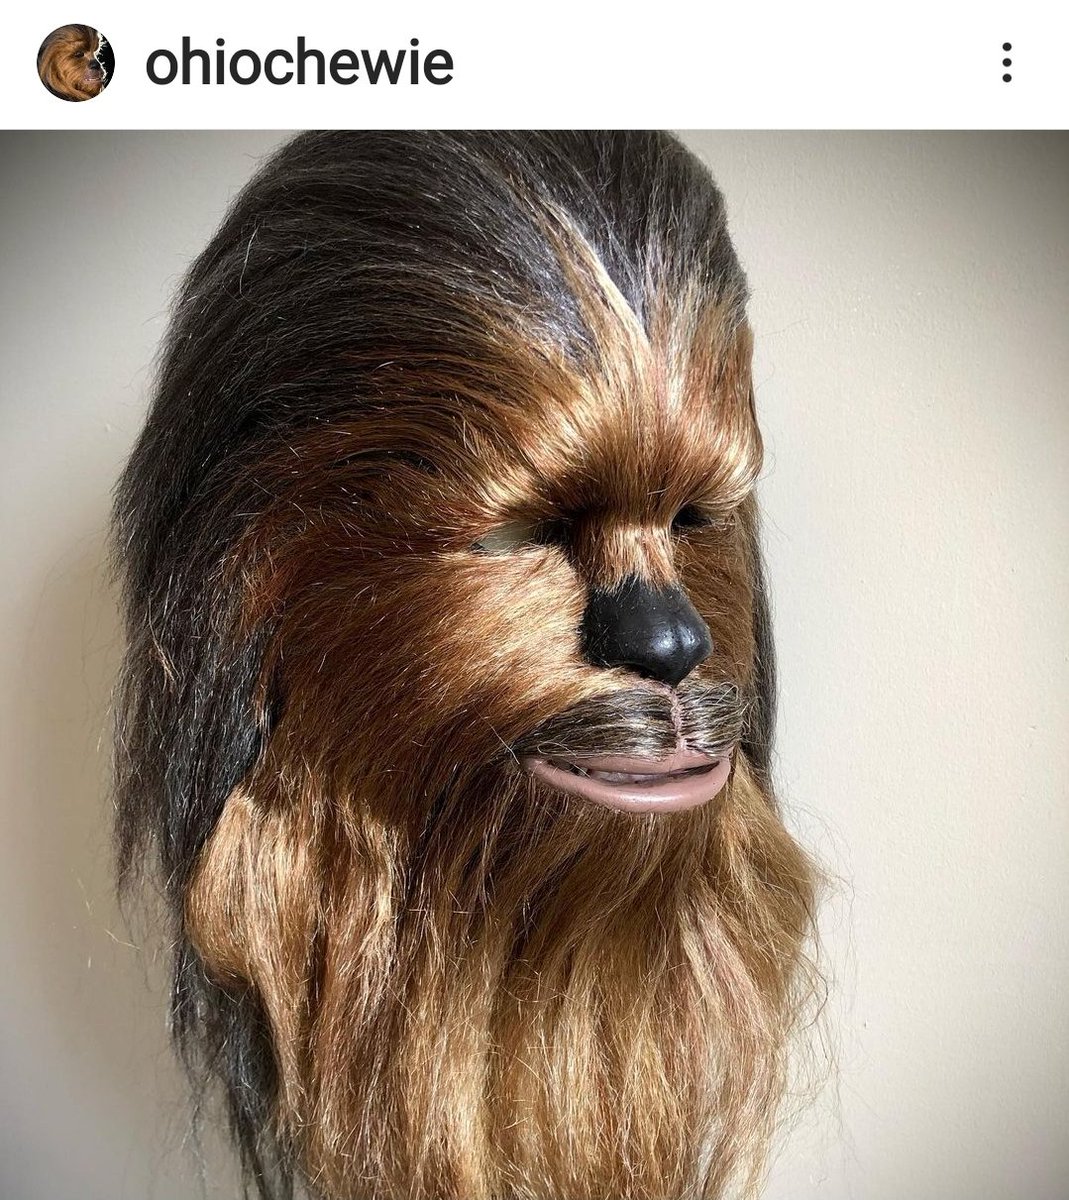 I have a question for you below this info. This outstanding Chewbacca mask was made by one of the best Chewbacca cosplayers (ohiochewie on IG) around. You can win it here and help Peter Mayhew's Foundation. https://t.co/ZcXSnV1EHH
In your opinion, does Chewbacca have a mustache? https://t.co/X6gAtWuwxE